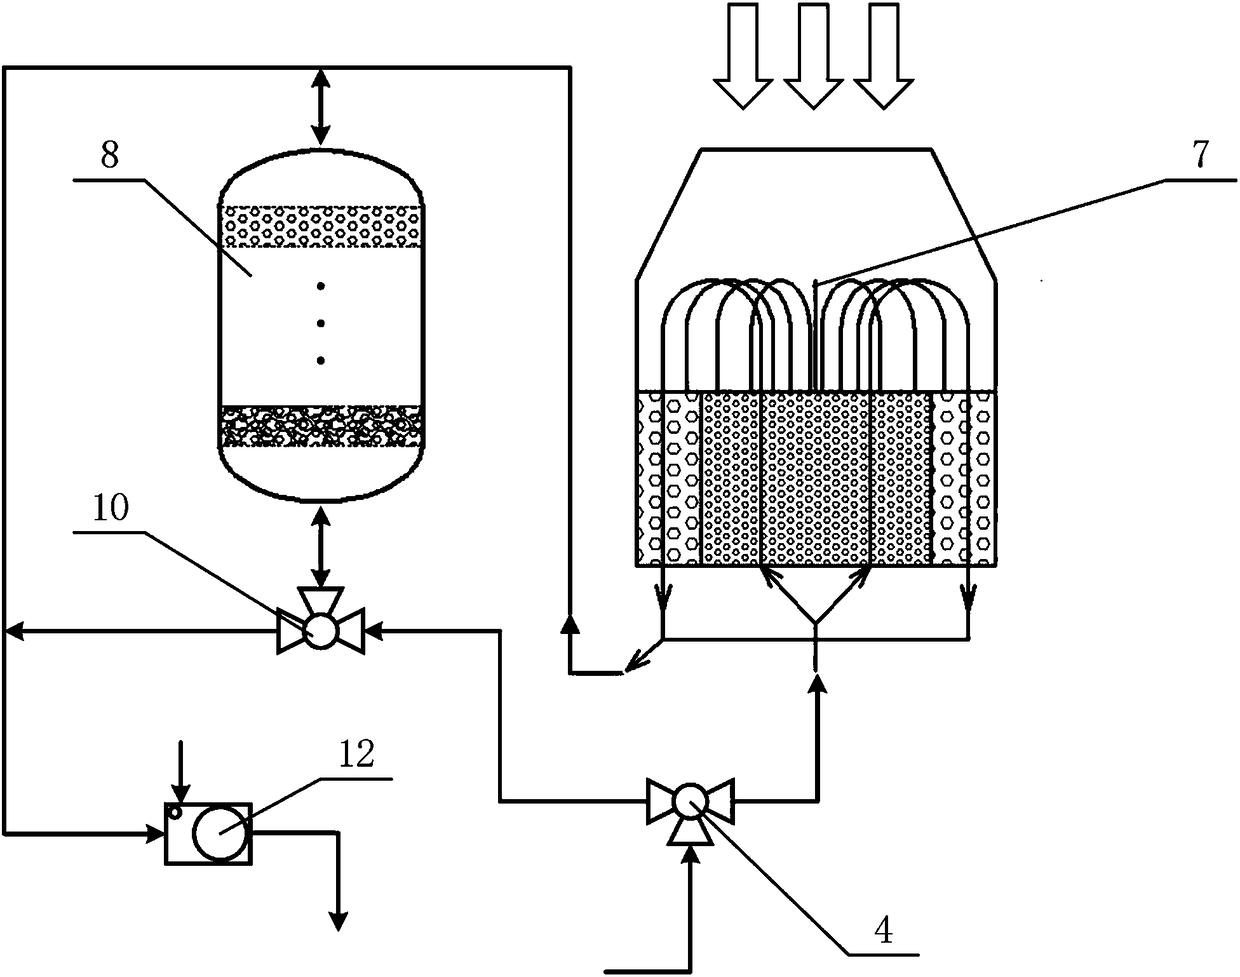 Solar high-temperature heat collecting and storage gas turbine power generation device